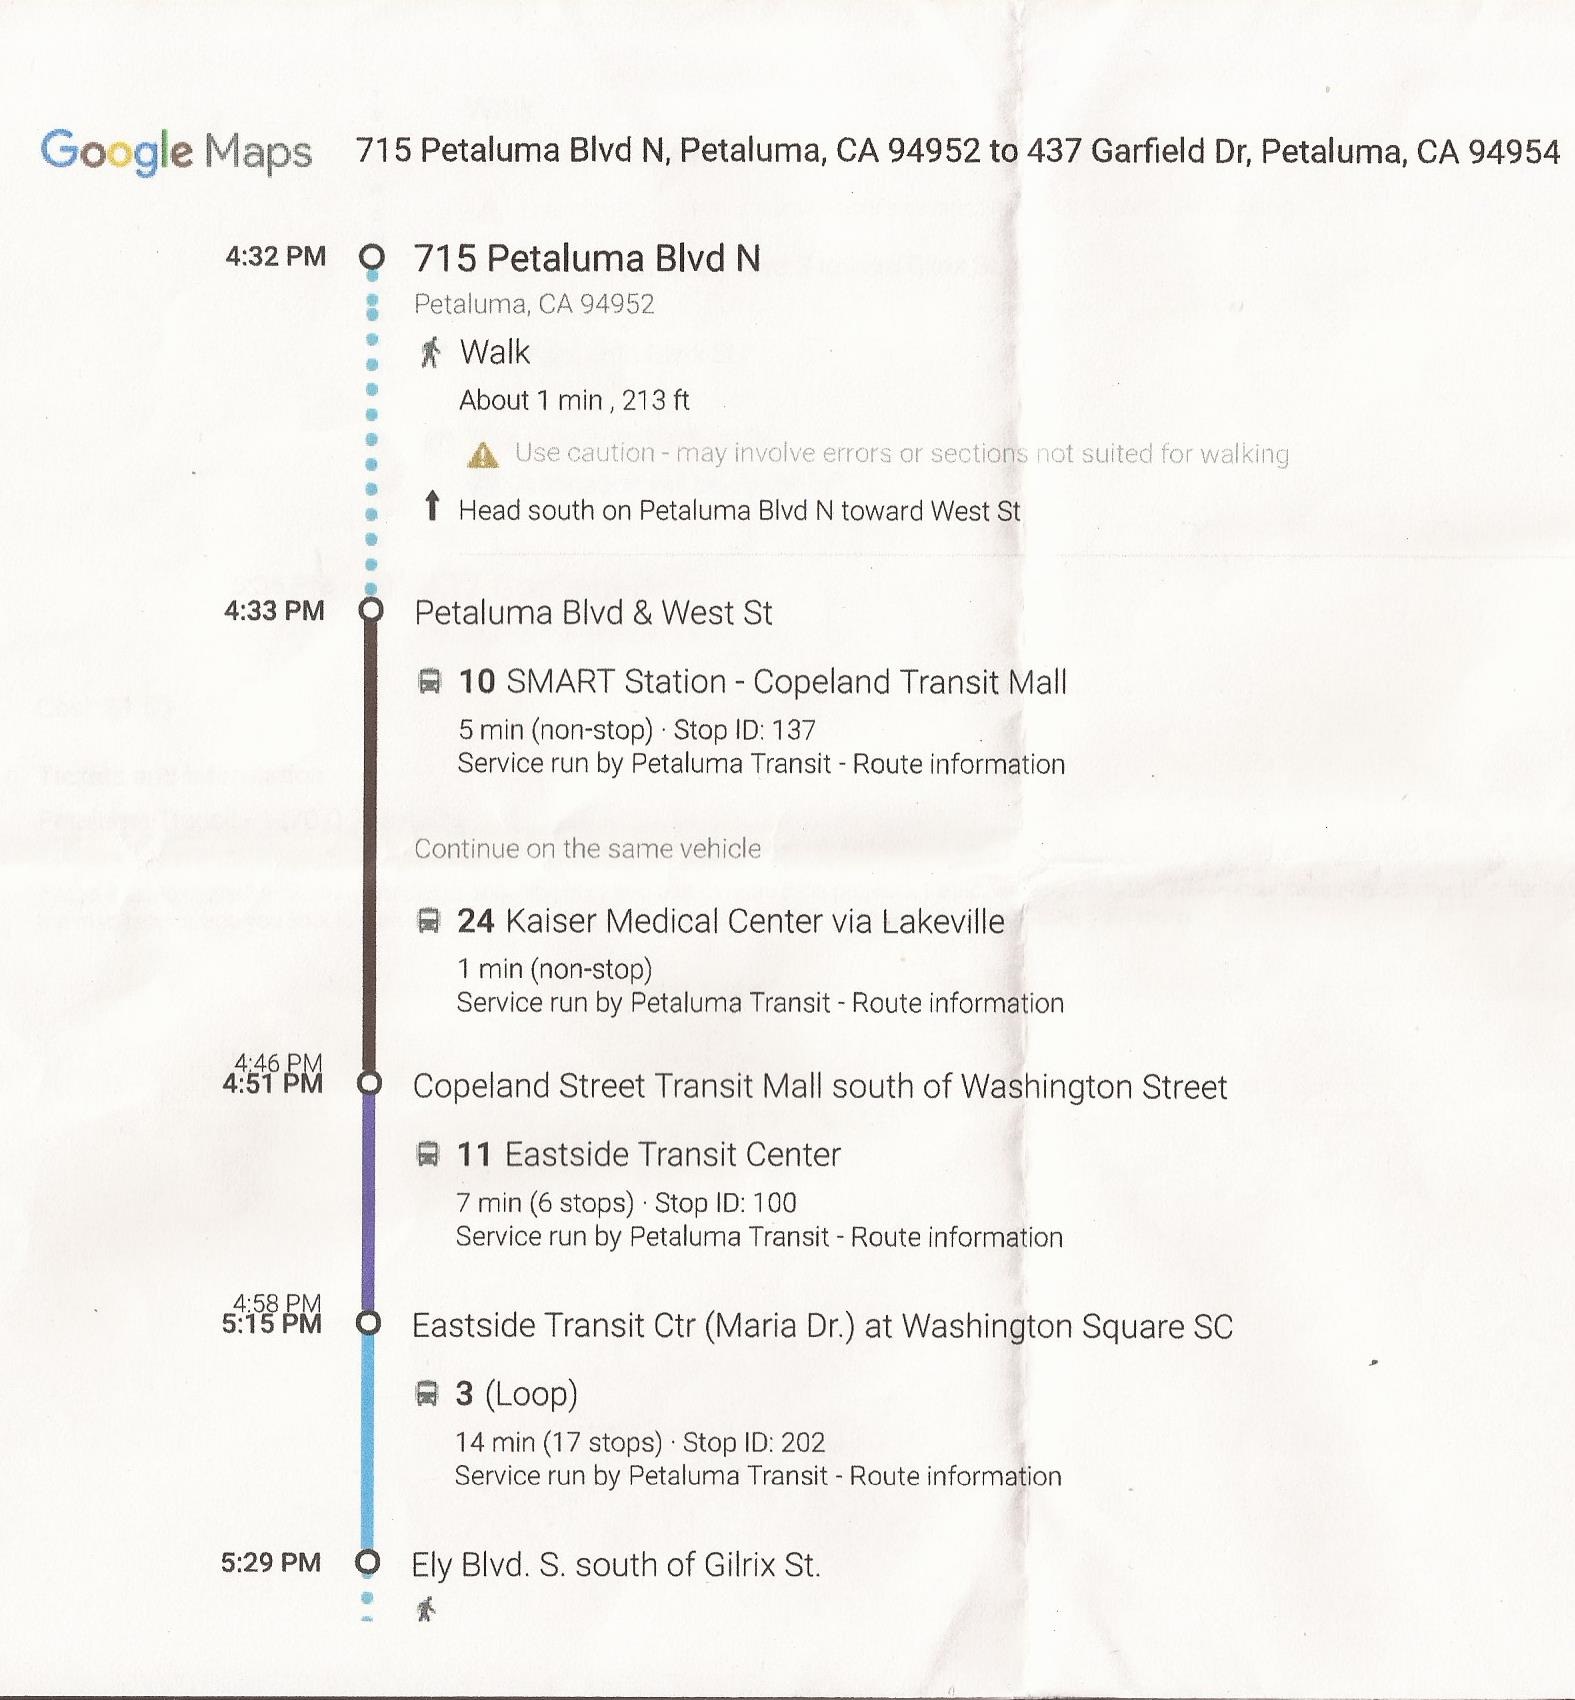 Scan of the bus schedule